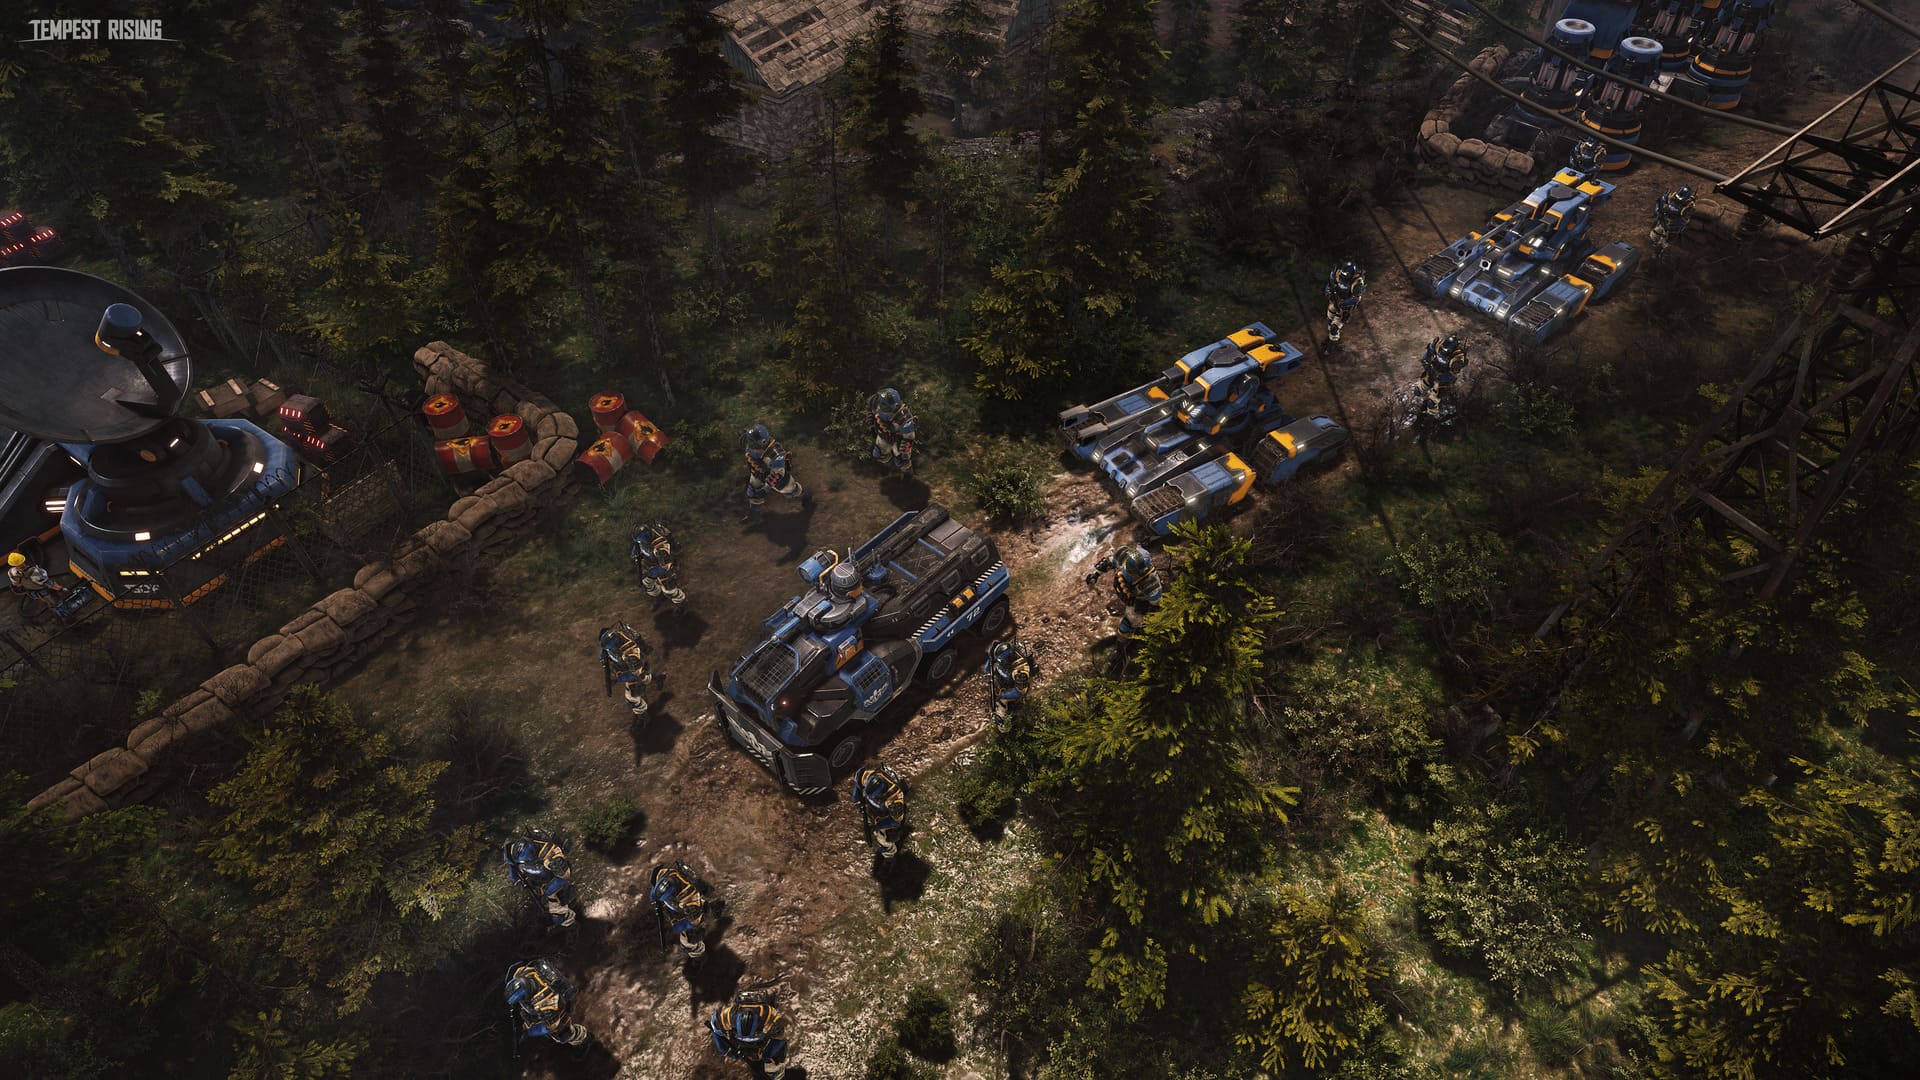 An aerial view in Tempest Rising with infantry, artillery, and tank units moving through a forest.